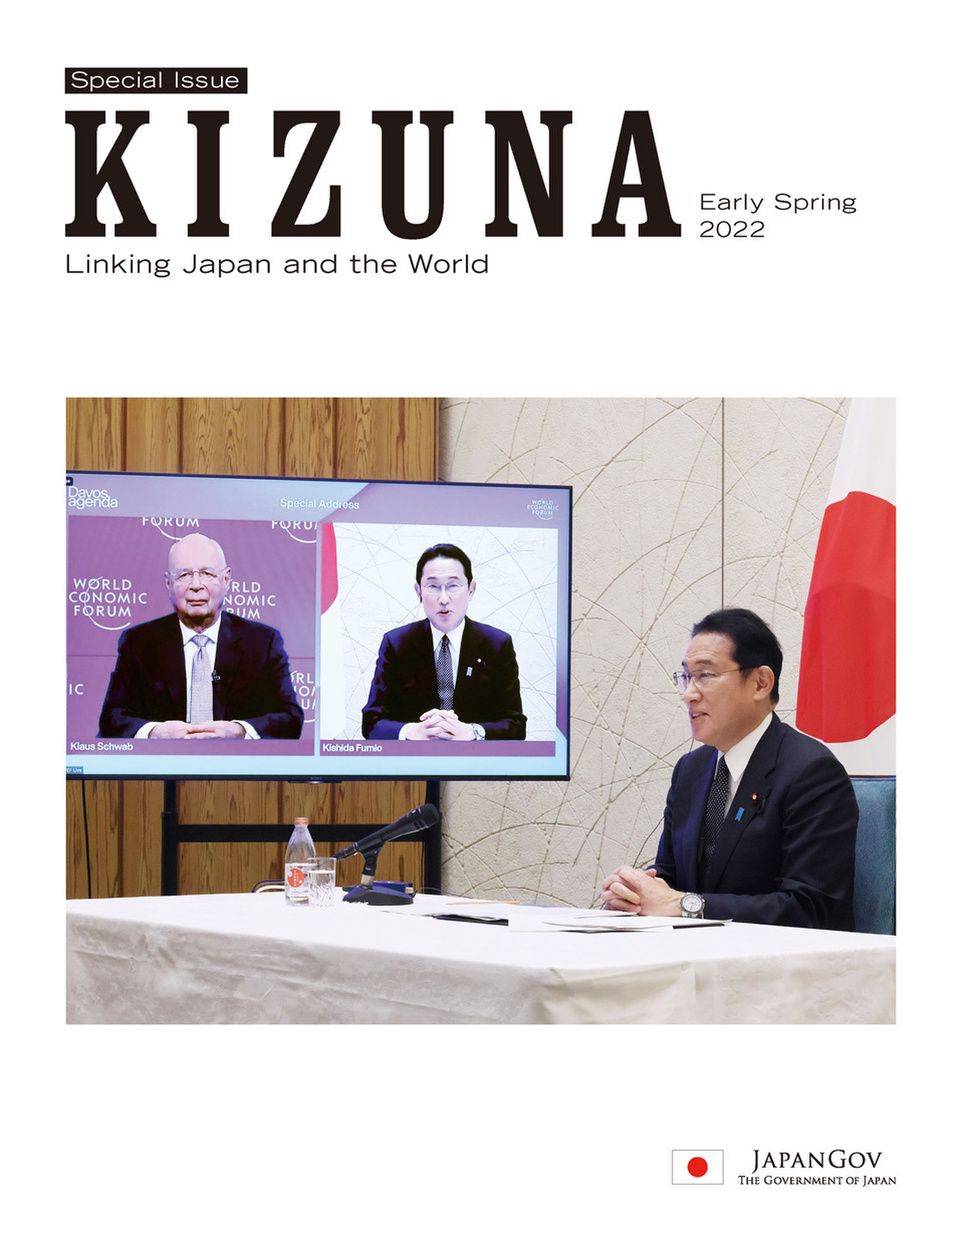 KIZUNA Early Spring 2022 Special Issue